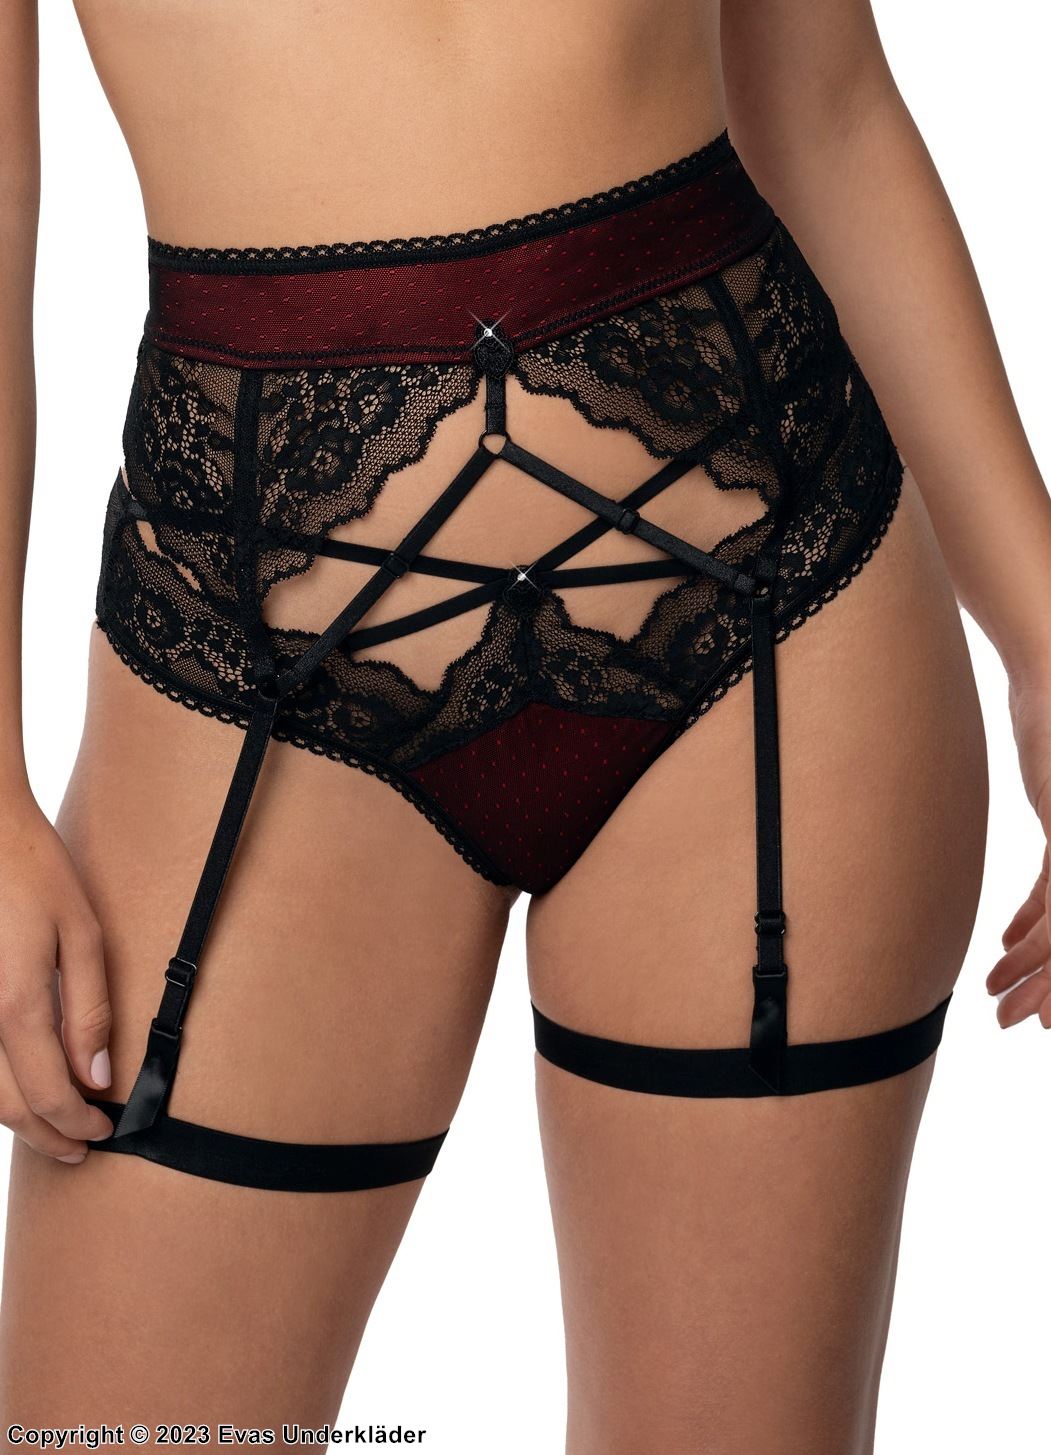 Garter belt and panty, floral lace, crossing straps